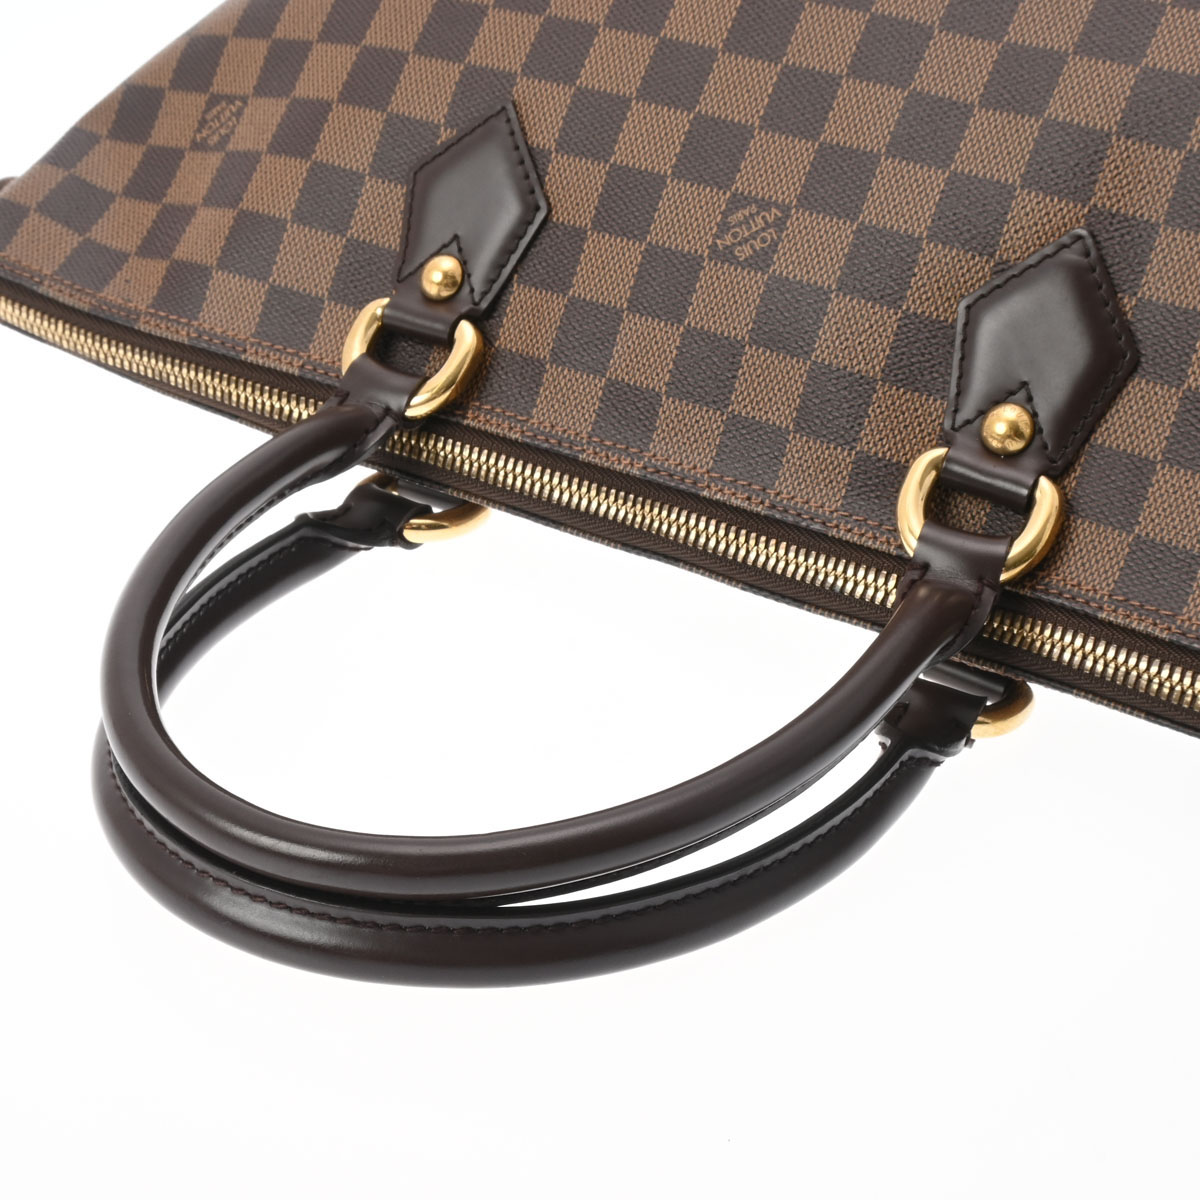 LOUIS VUITTON ルイヴィトン サレヤMM ダミエ N51182